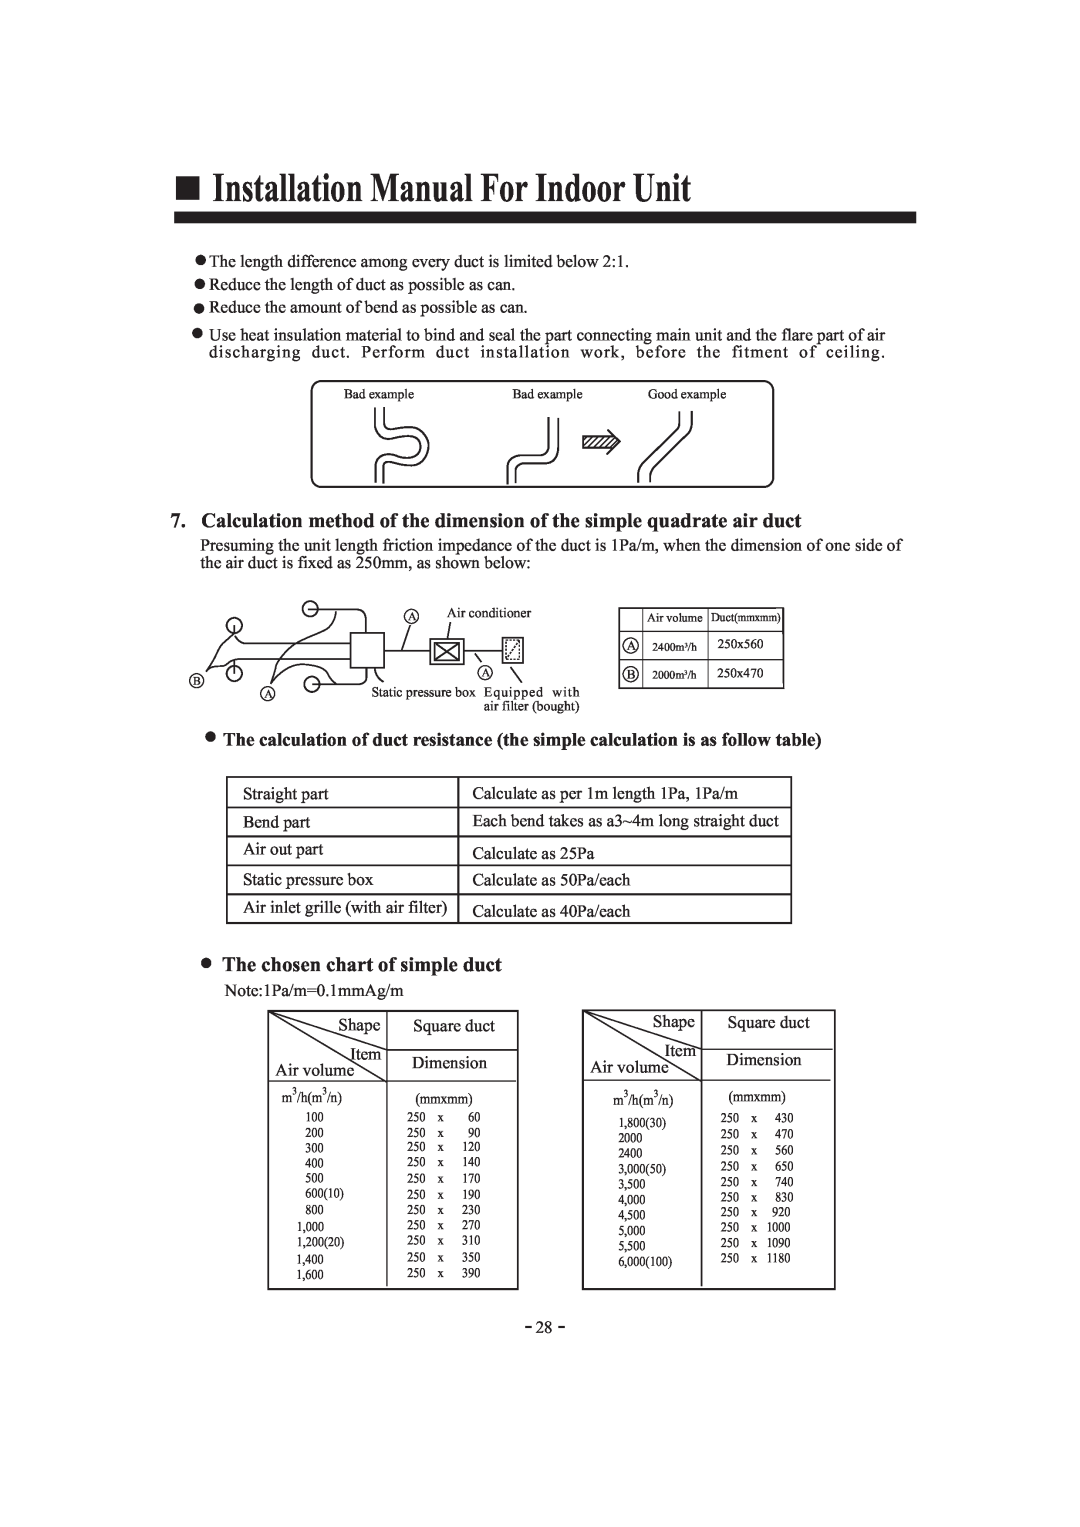 Haier HDU-42HF03/H installation manual The chosen chart of simple duct, Installation Manual For Indoor Unit 